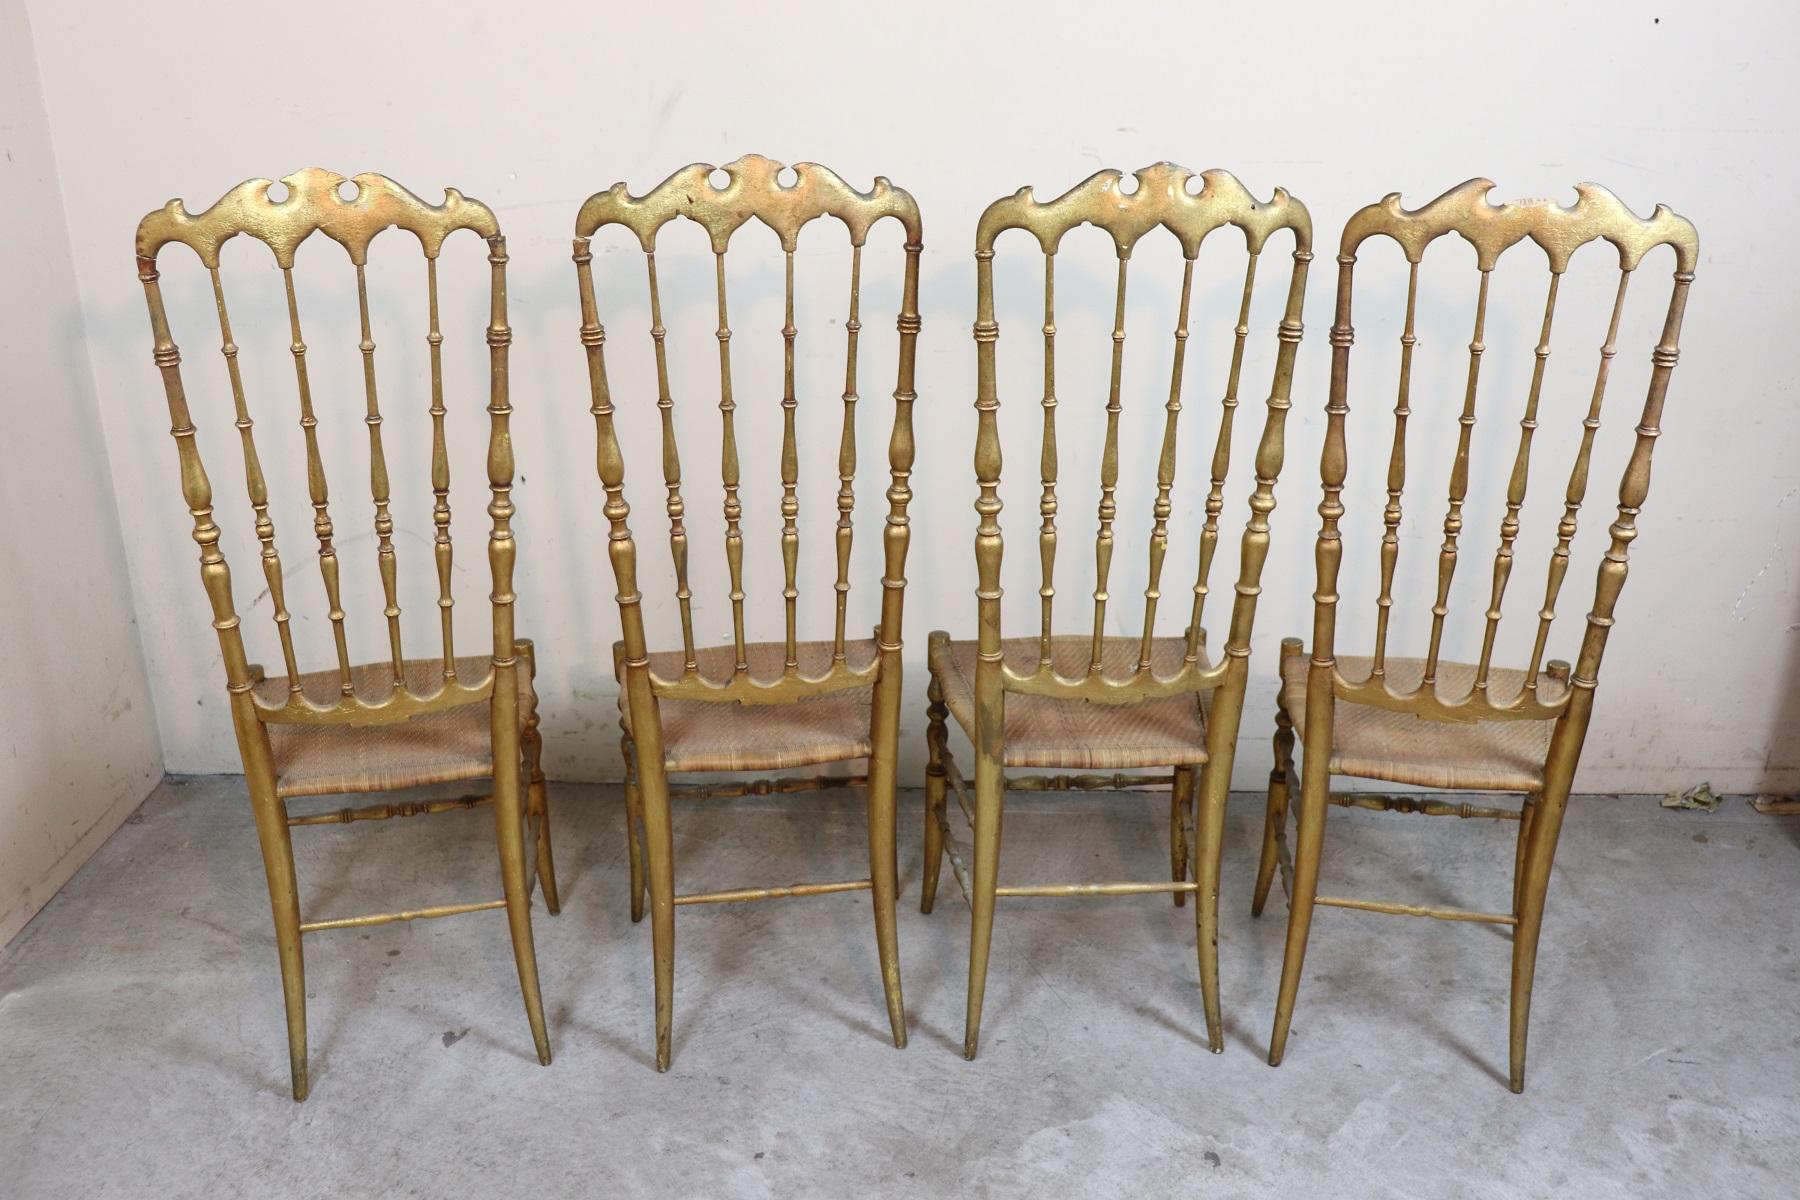 19th Century Italian Set of Four Turned and Gilded Wooden Famous Chiavari Chairs 6